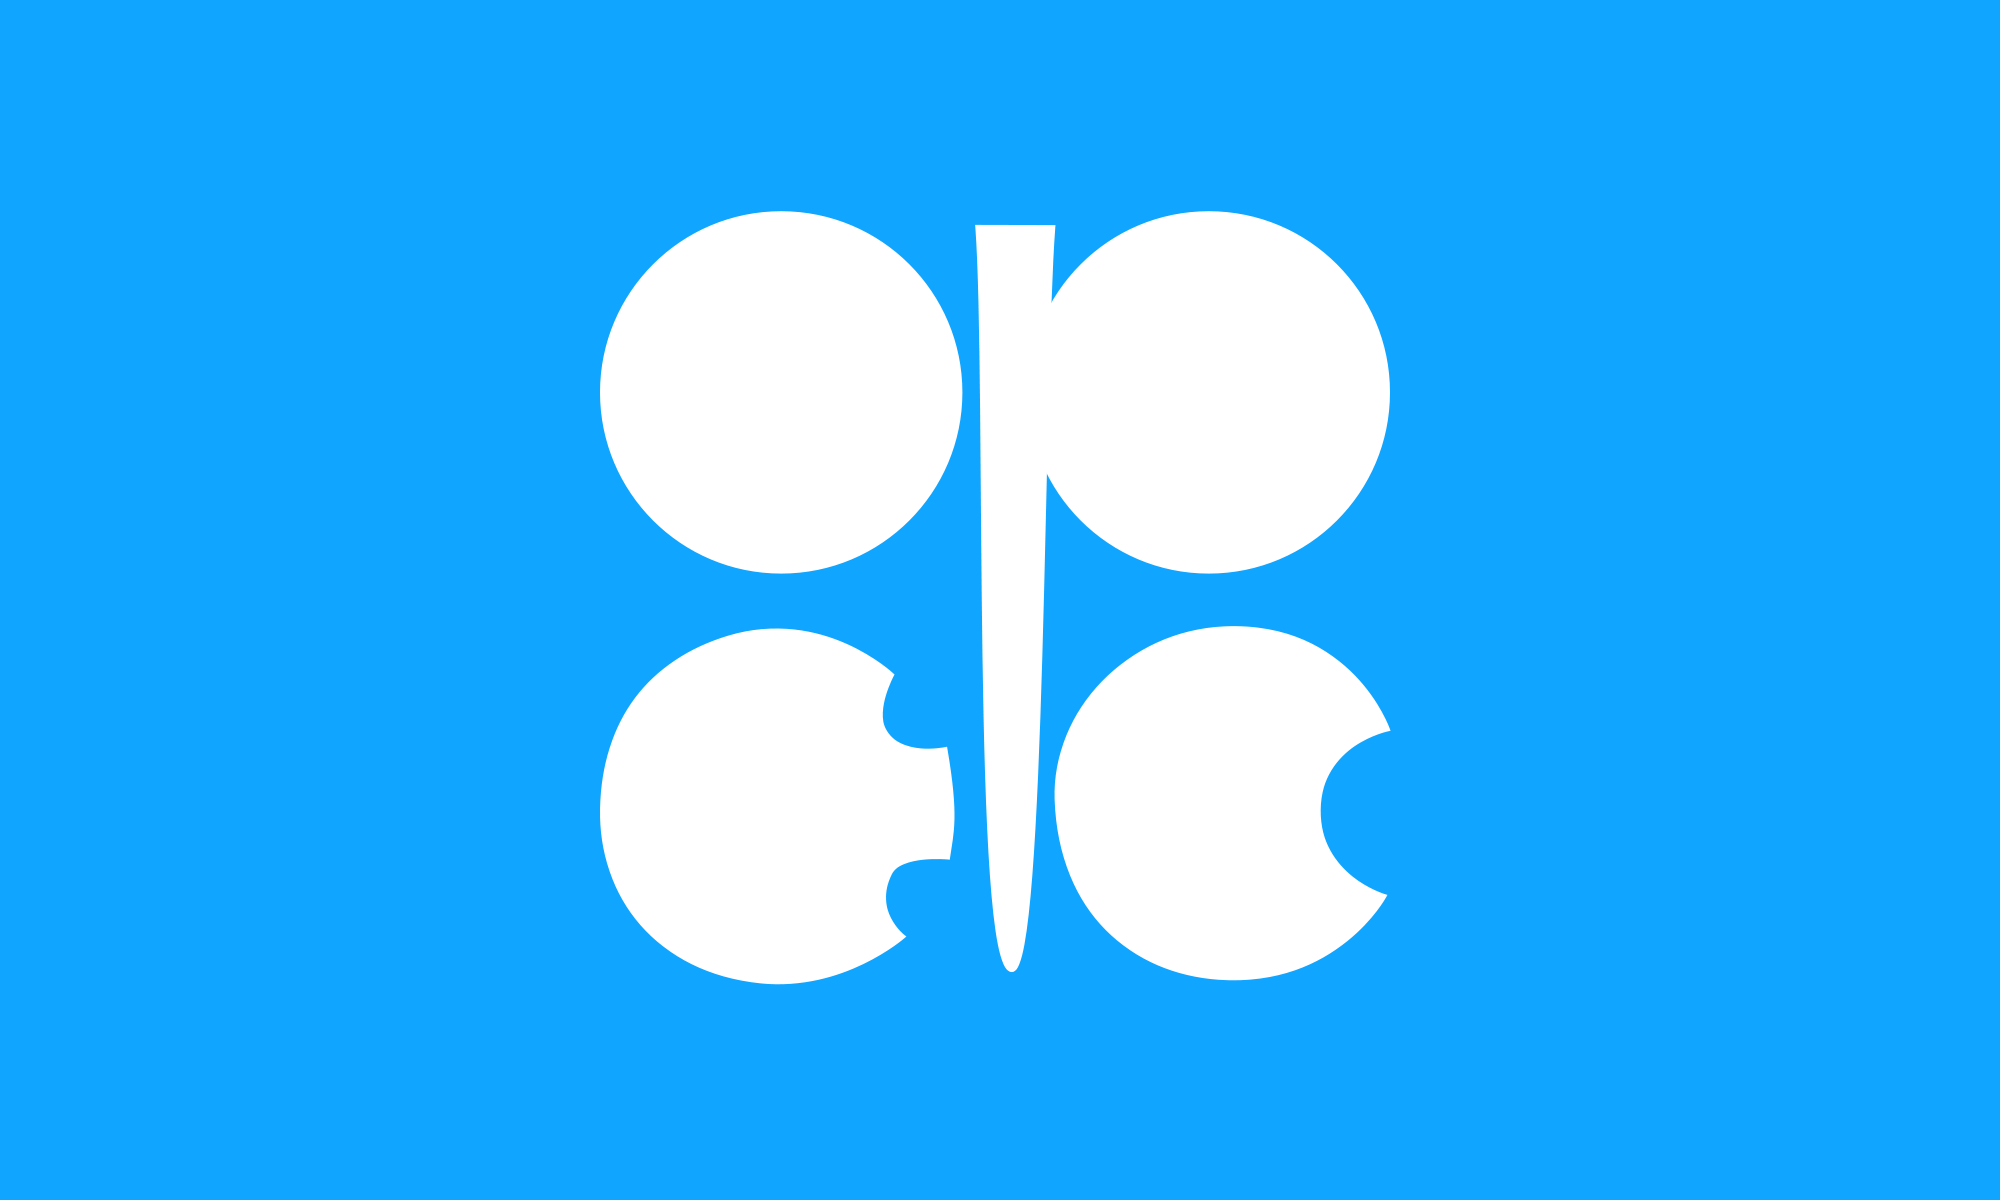 OPEC Chief to Visit Iran Ahead of Sept. Meeting